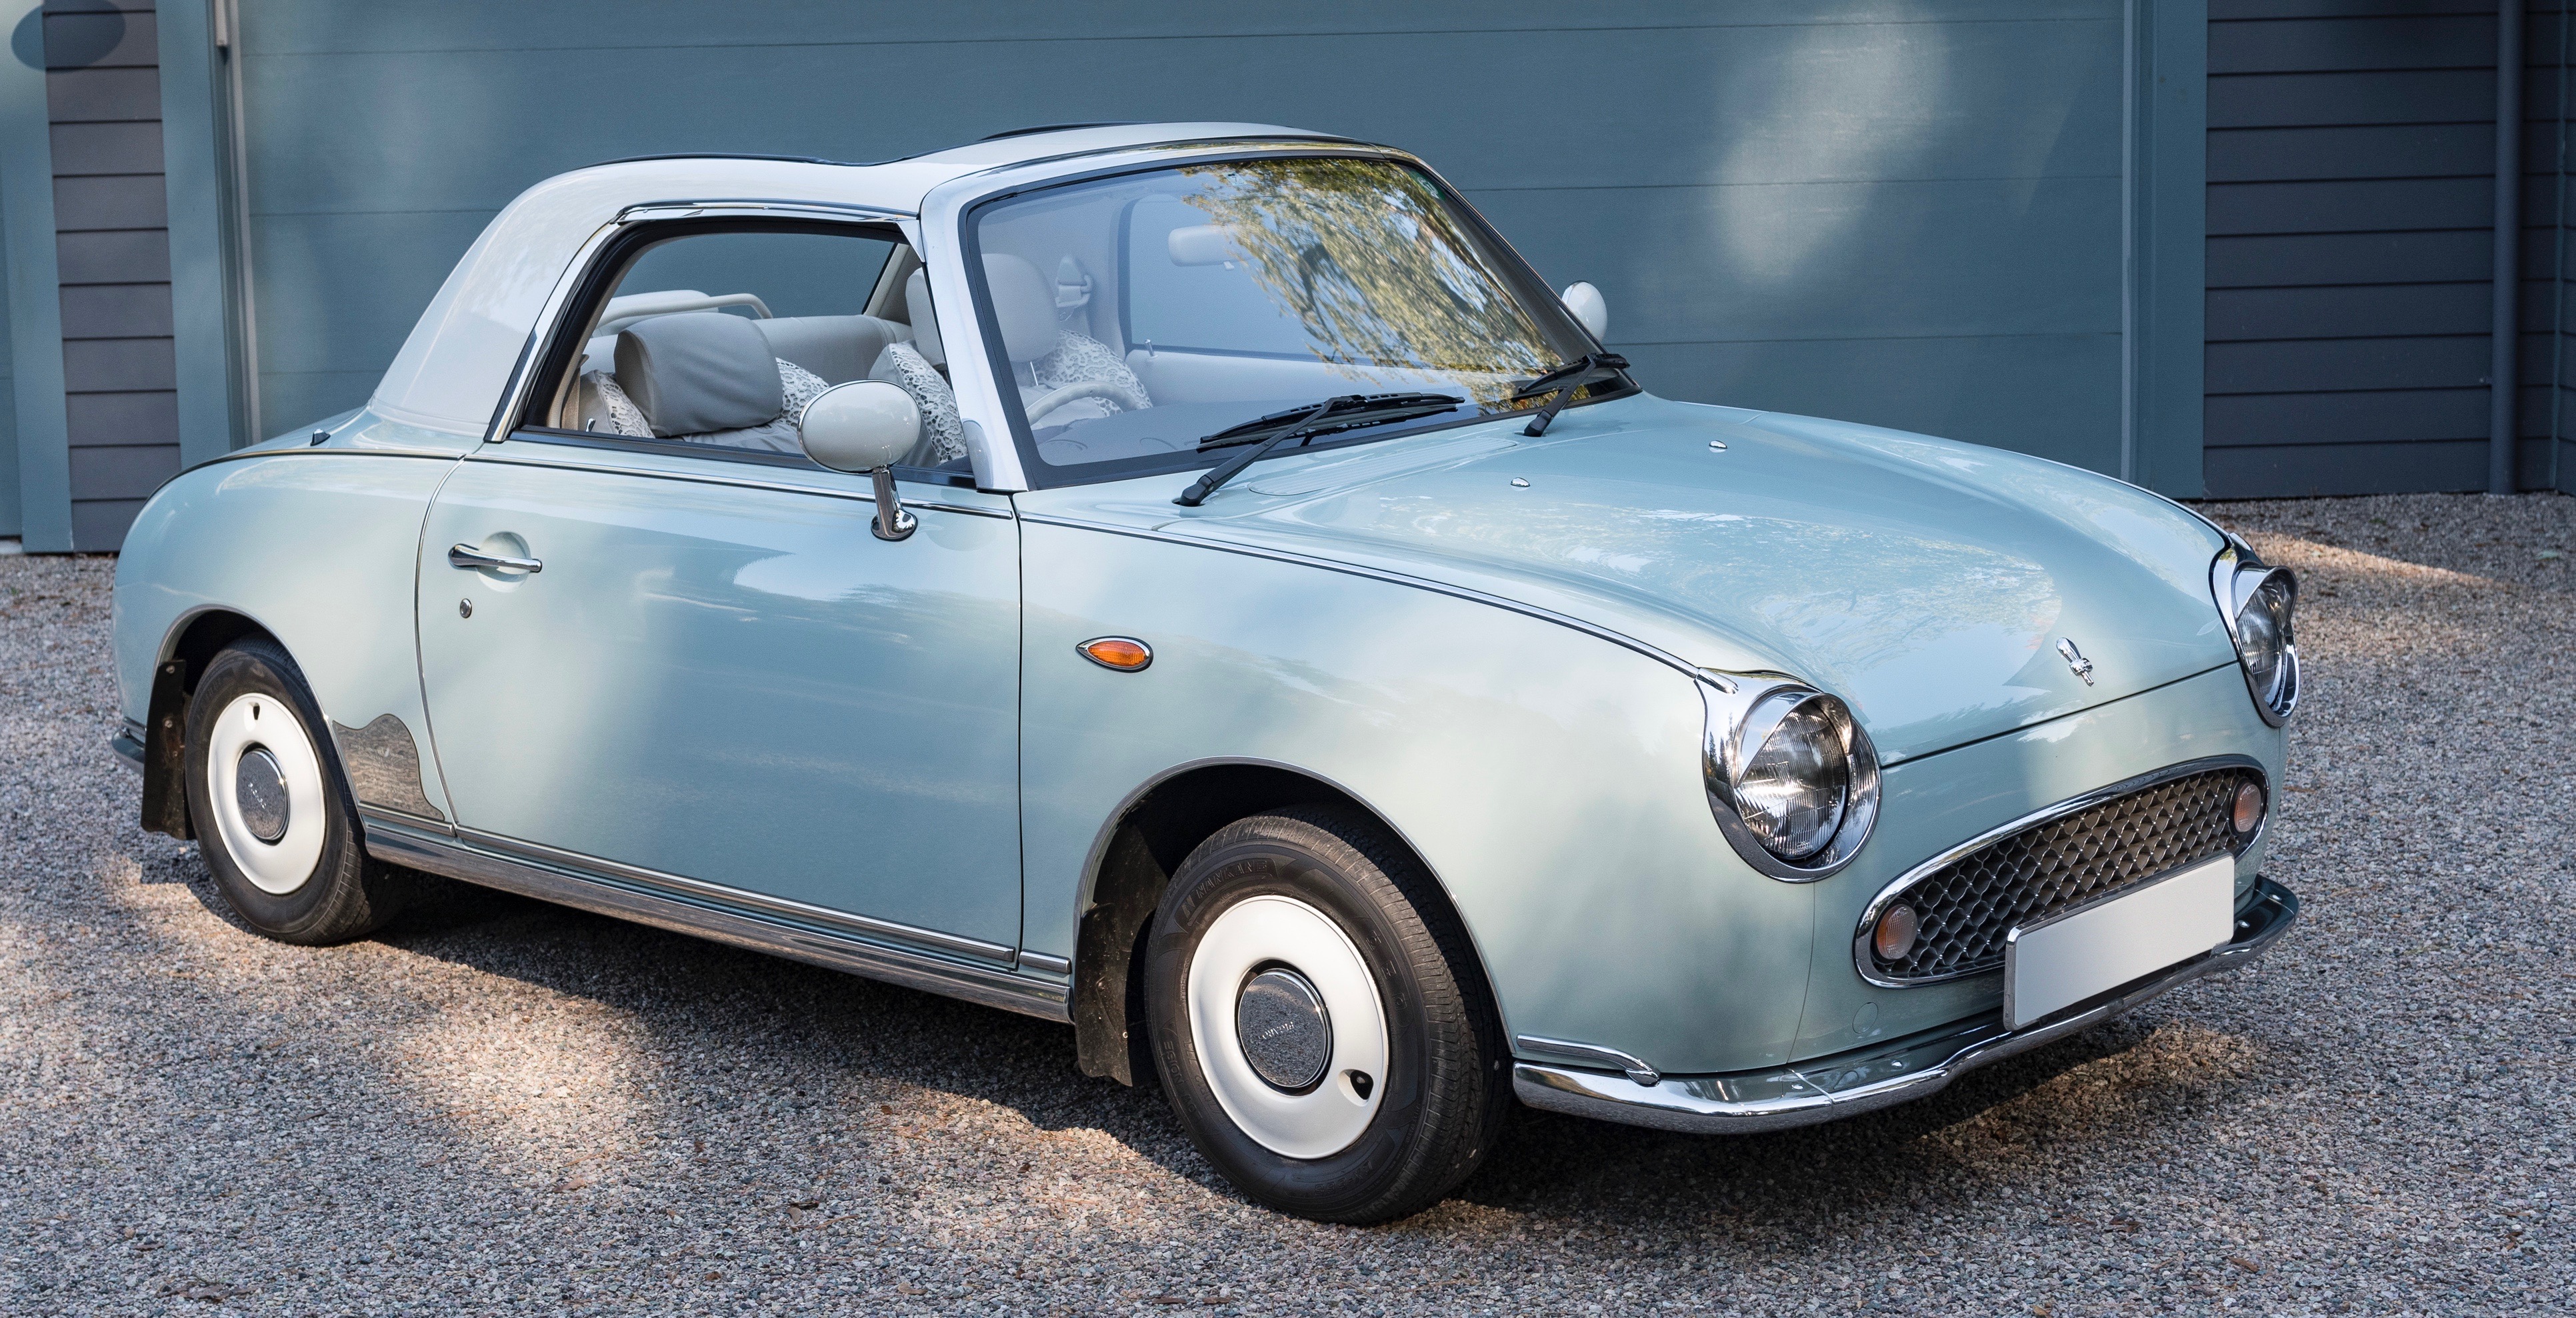 Figaro, Nissan Figaro next up for Sotheby’s online auction, ClassicCars.com Journal